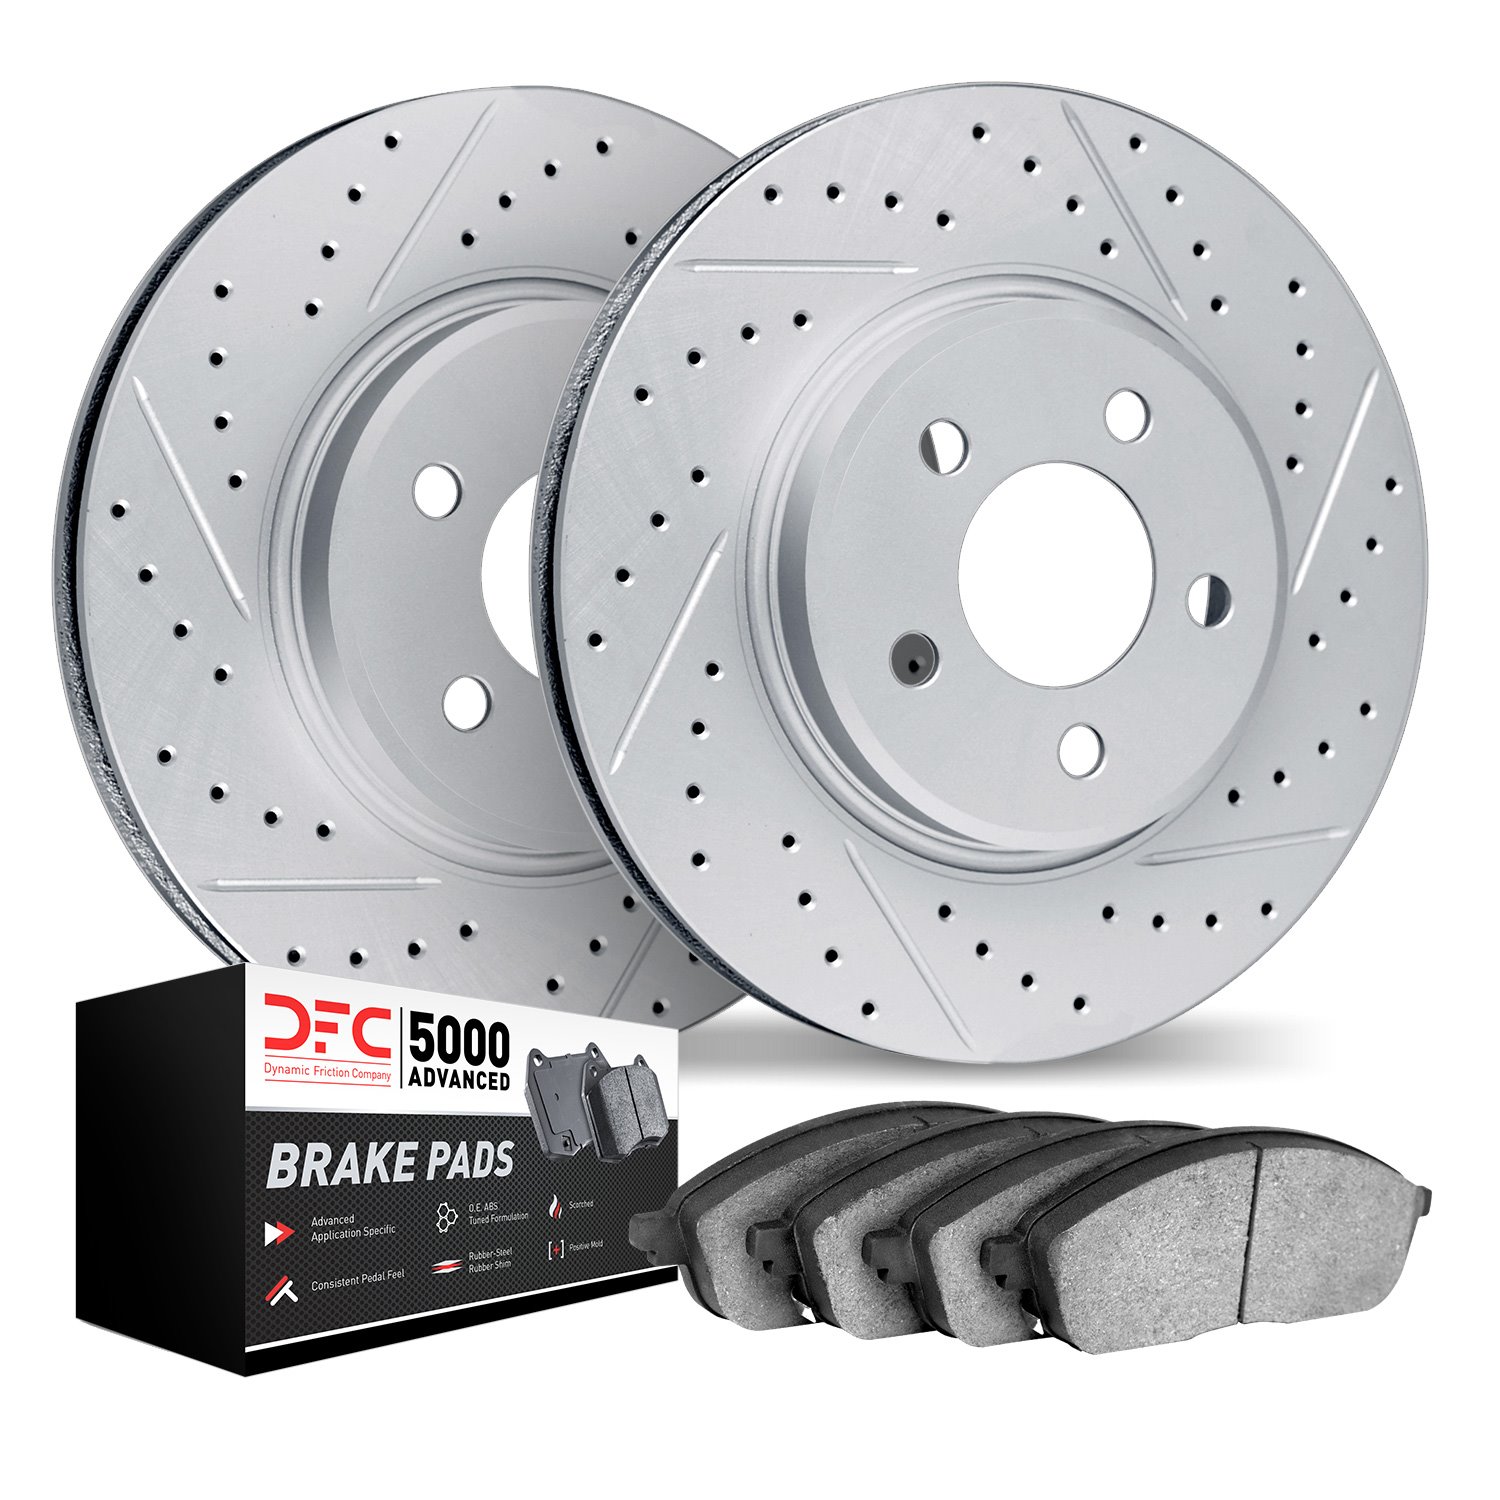 2502-11041 Geoperformance Drilled/Slotted Rotors w/5000 Advanced Brake Pads Kit, 2018-2020 Land Rover, Position: Front